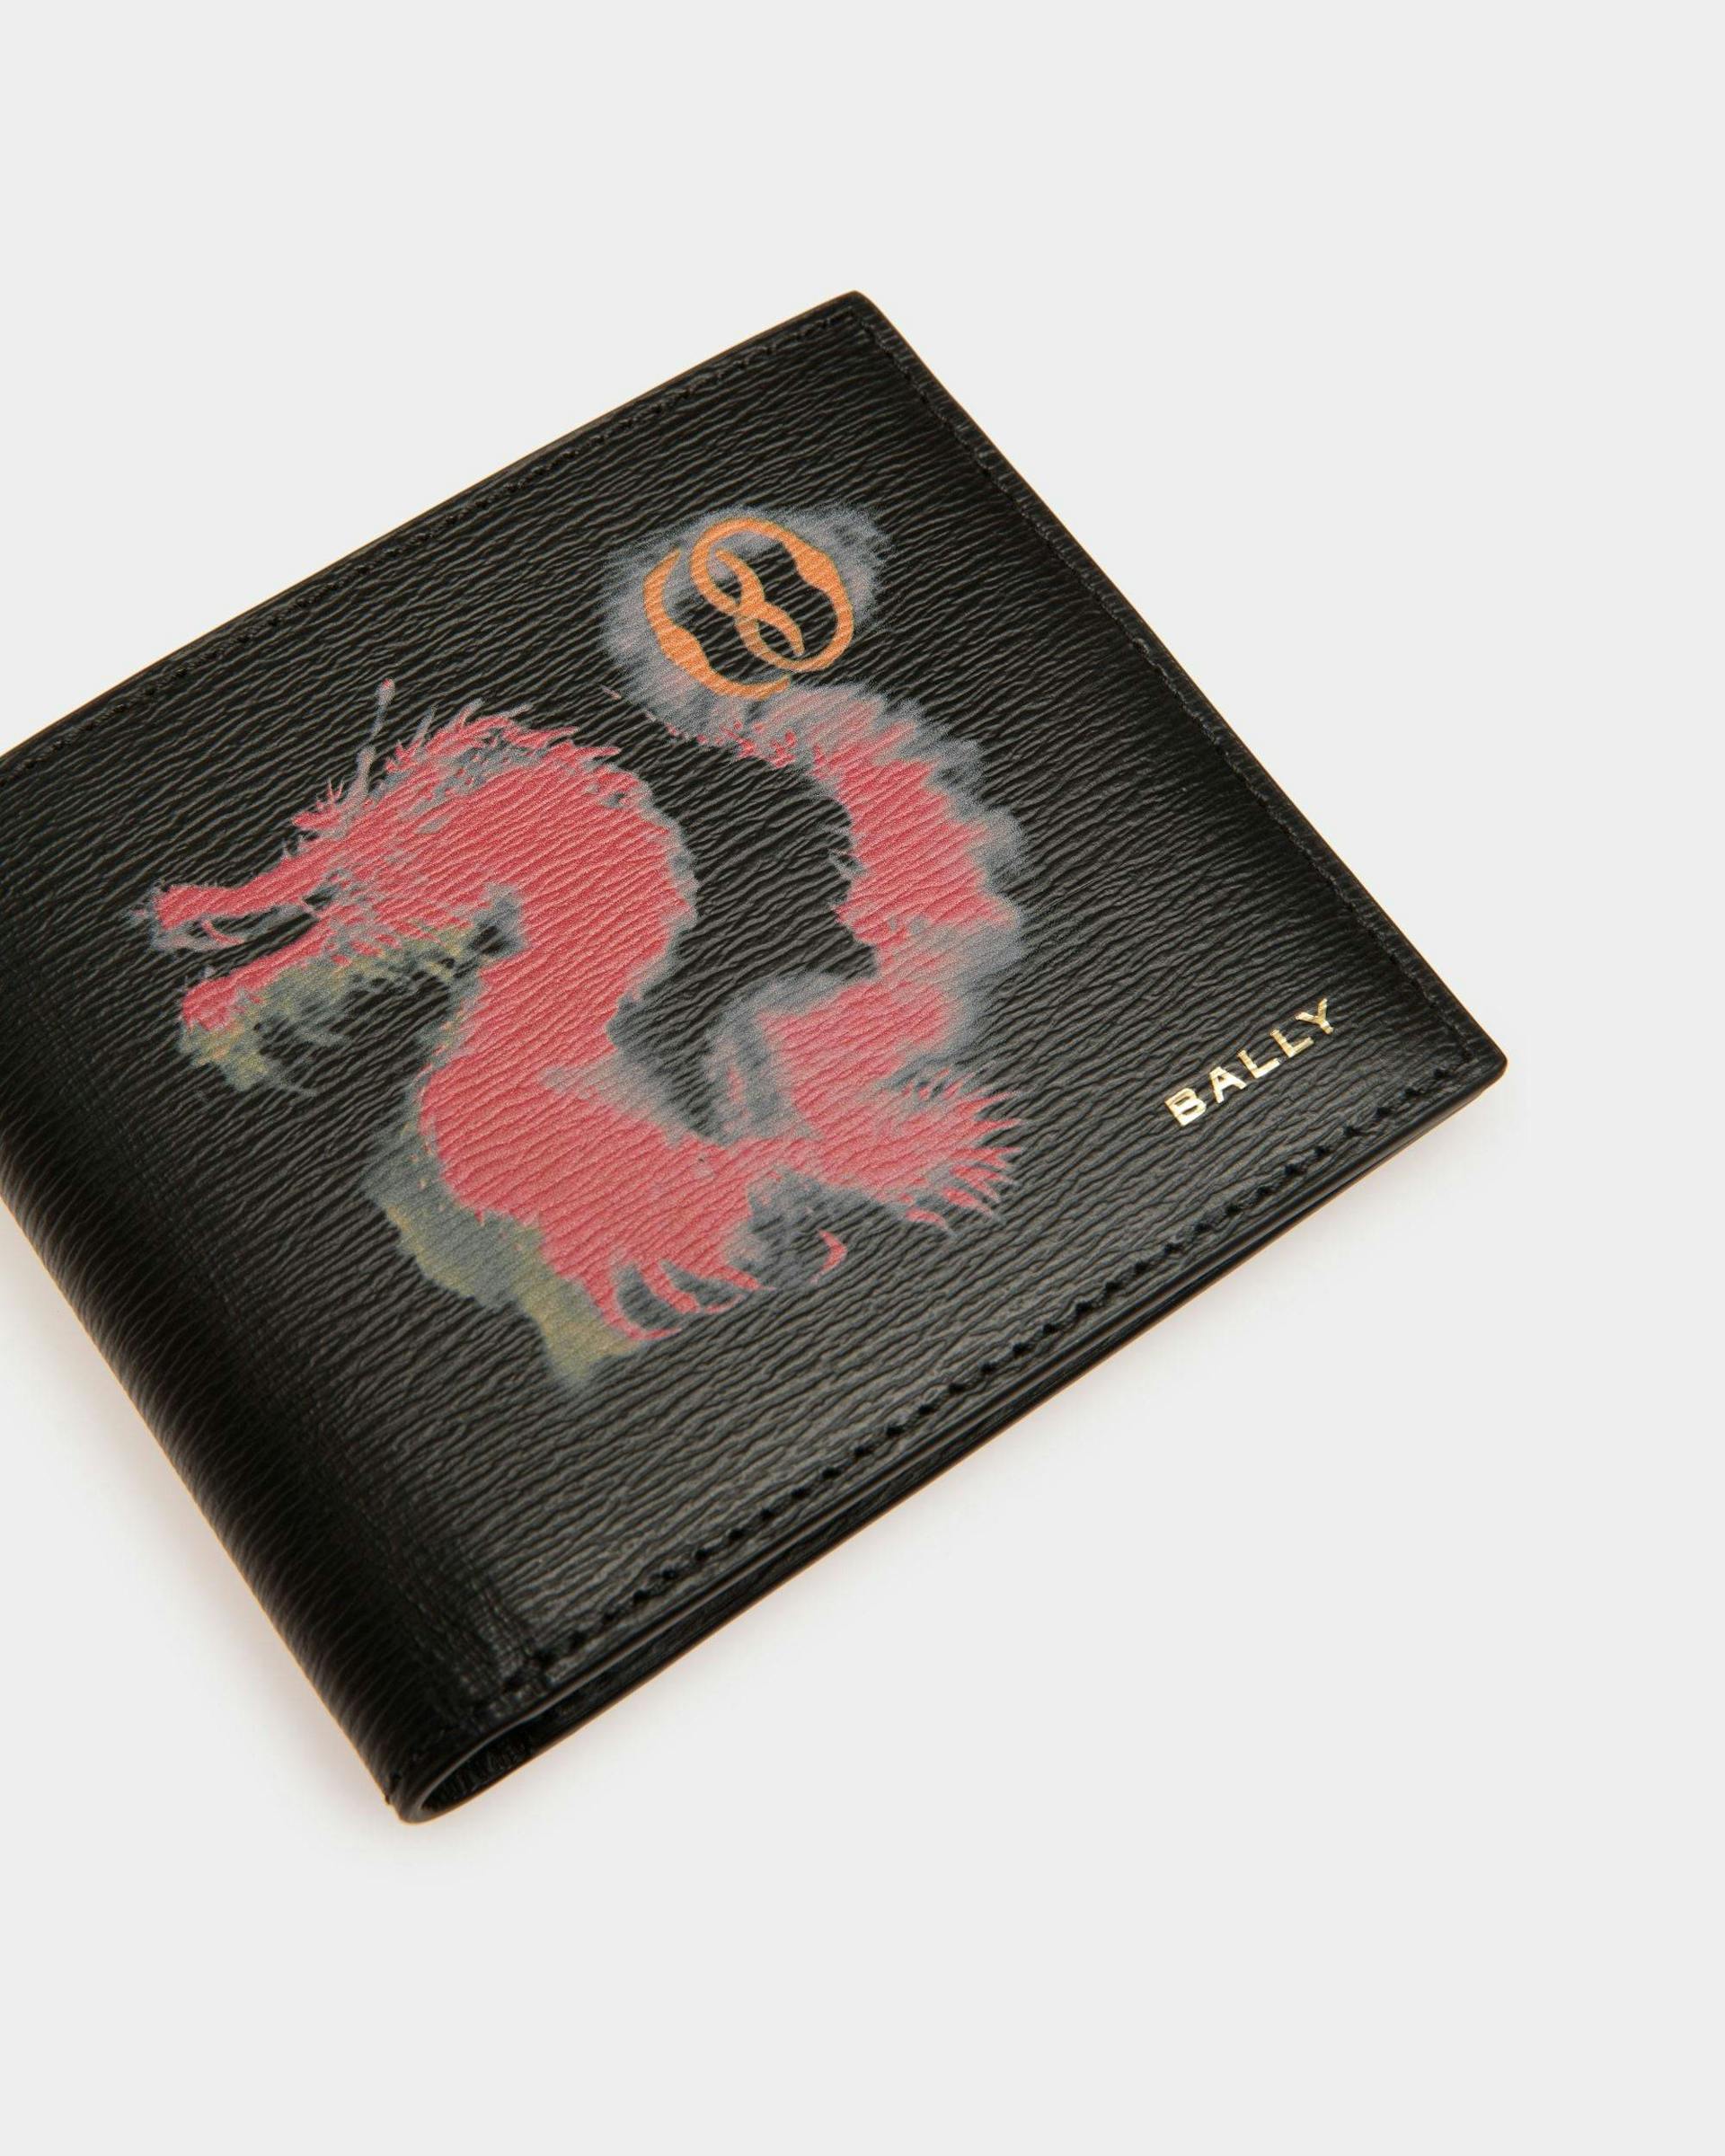 Men's Cny Bifold Wallet In Black And Red Grained Leather | Bally | Still Life Detail